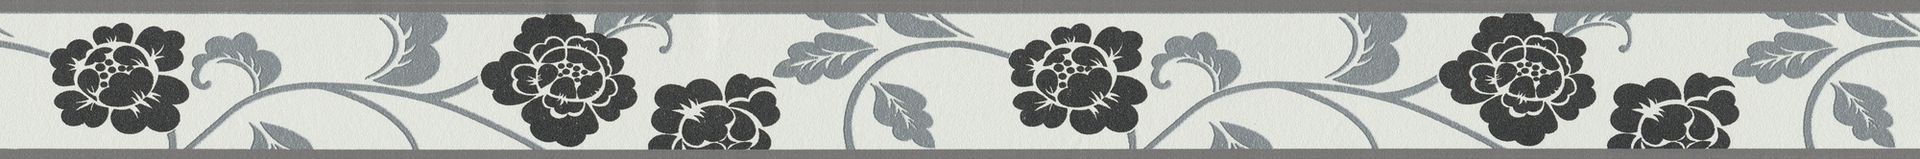 A.S. Création Only Borders 10, Florale Tapete, schwarz, silber 261014